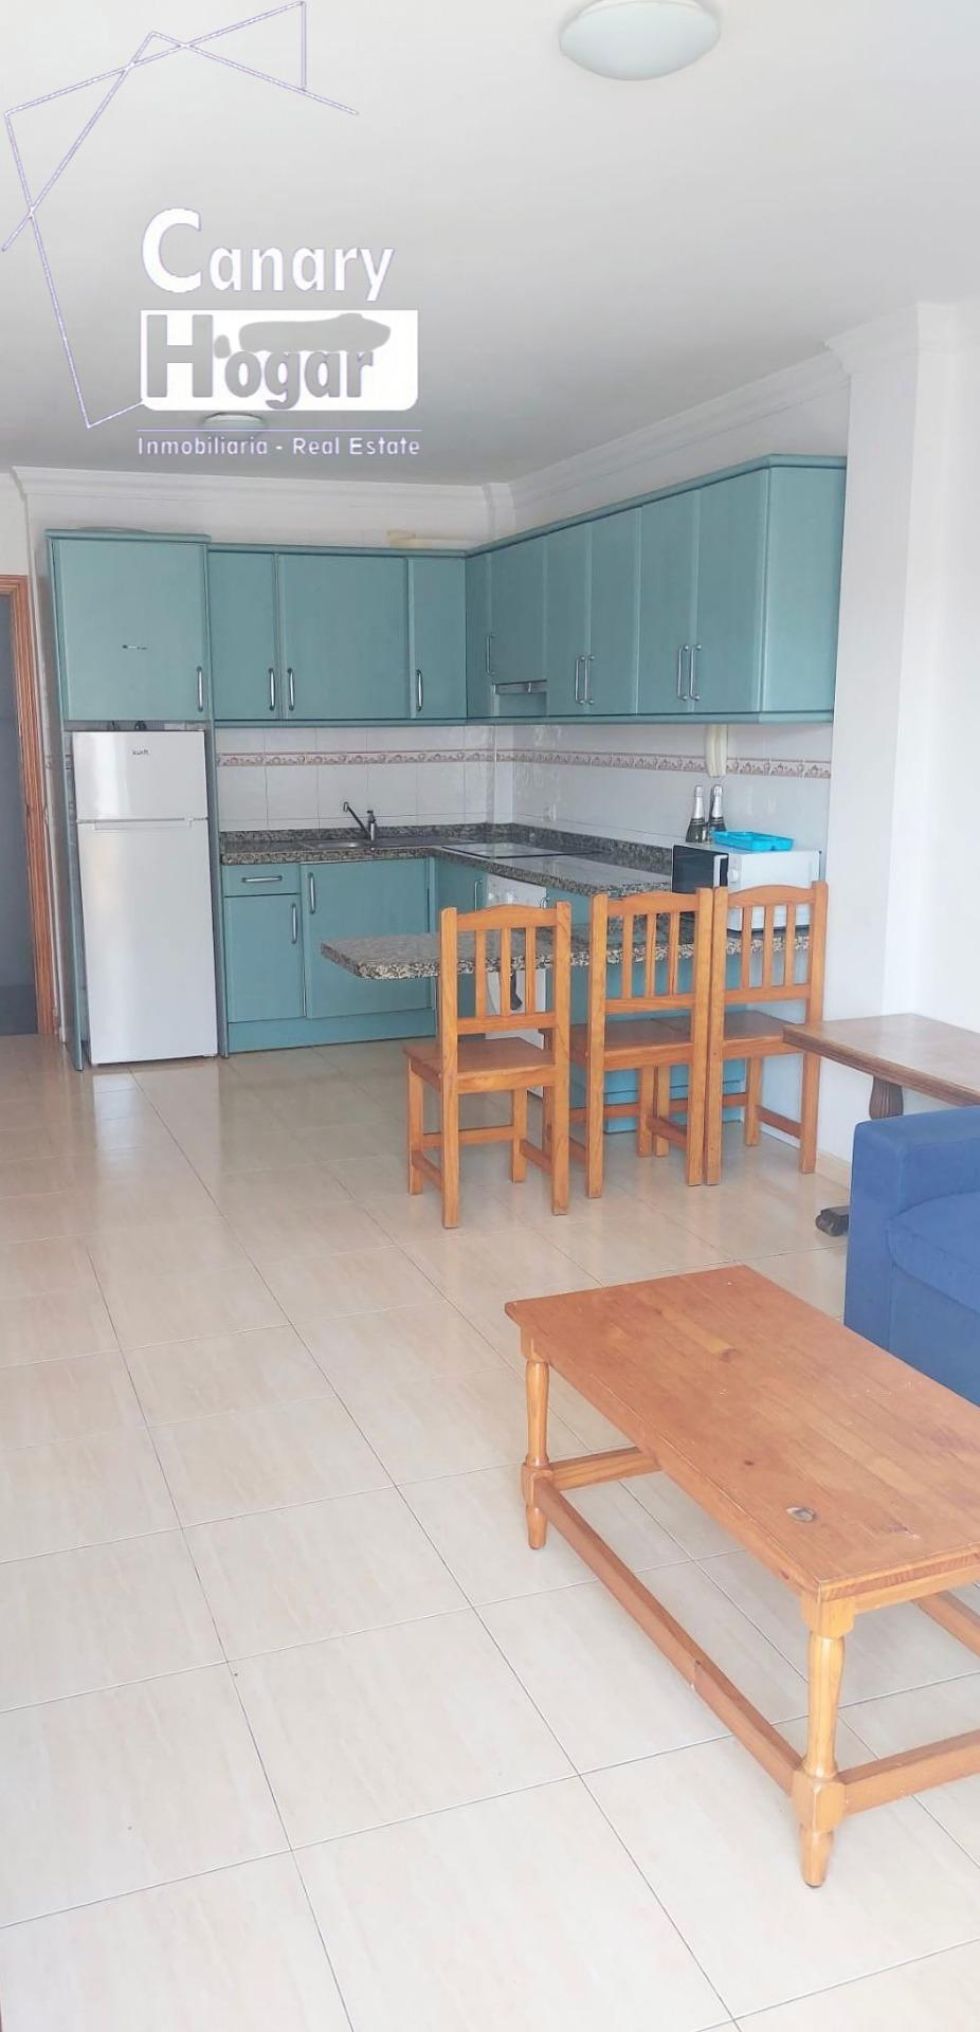 Apartment for sale in  Arona, Spain - 052271